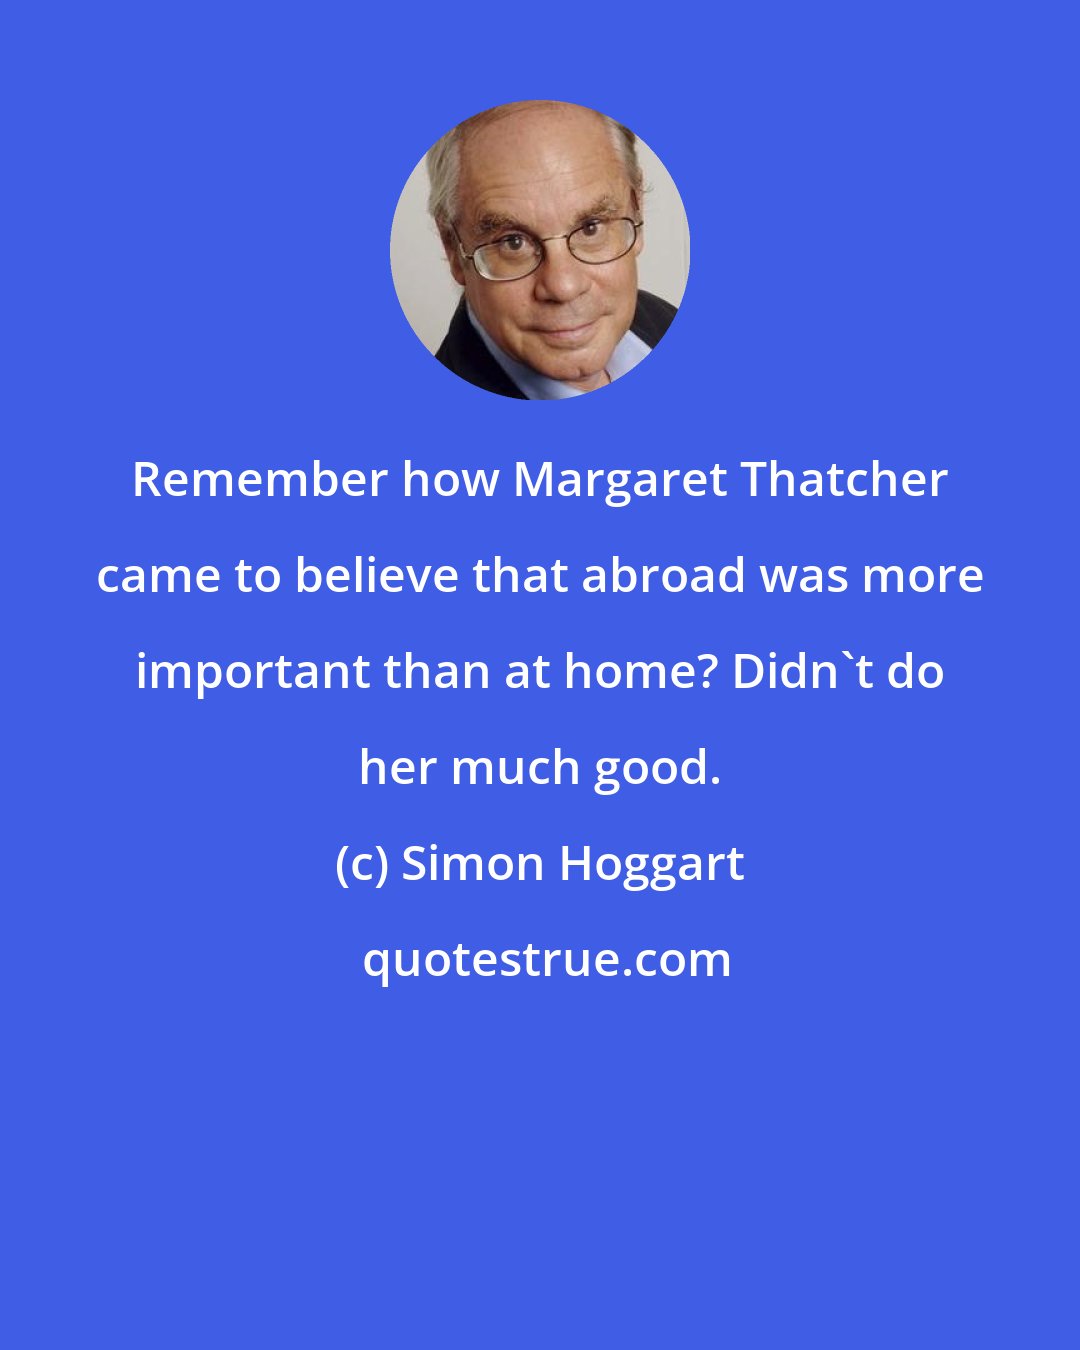 Simon Hoggart: Remember how Margaret Thatcher came to believe that abroad was more important than at home? Didn't do her much good.